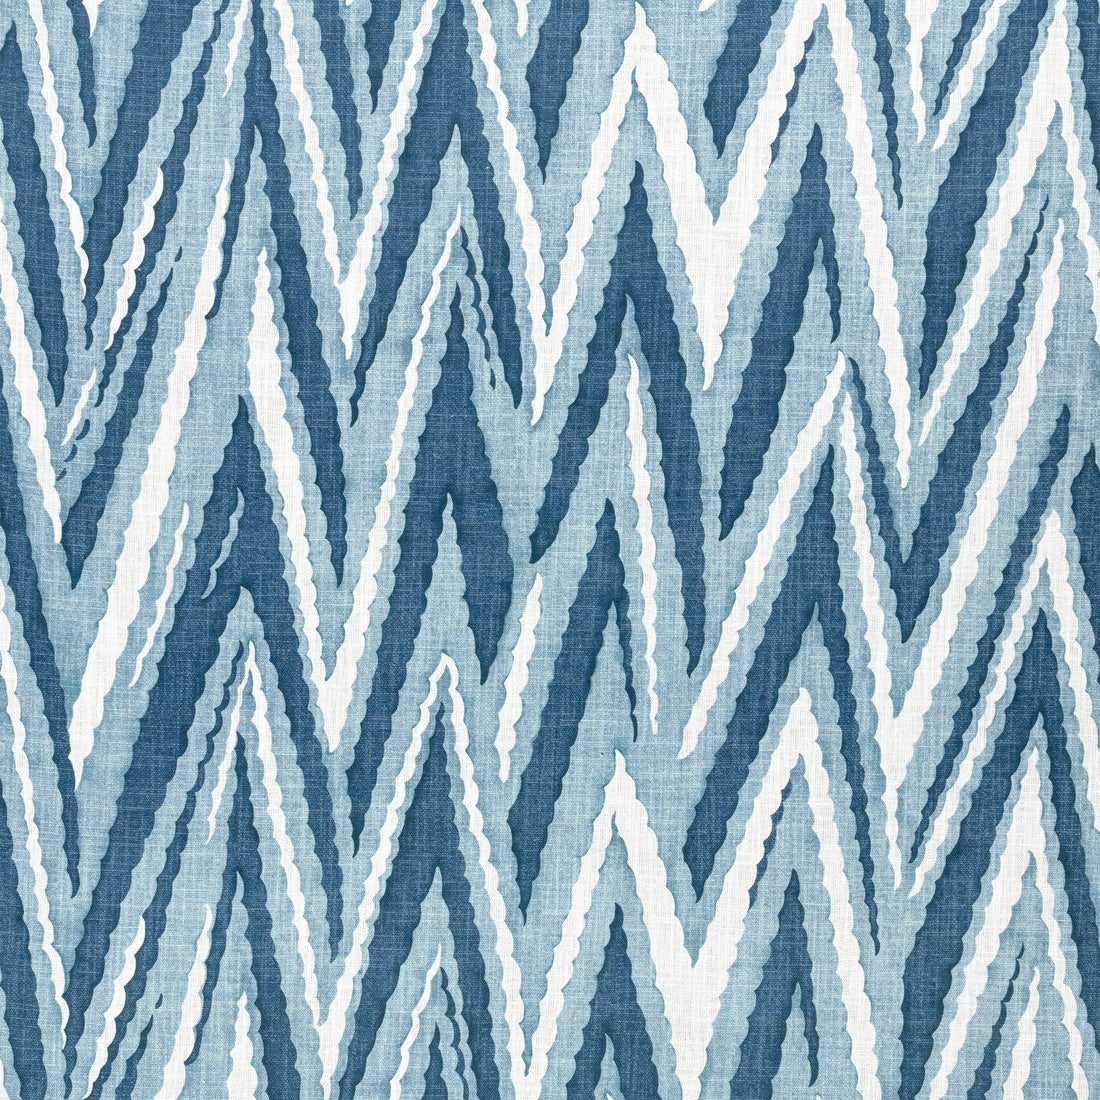 Highland Peak fabric in blue color - pattern number AF23138 - by Anna French in the Willow Tree collection